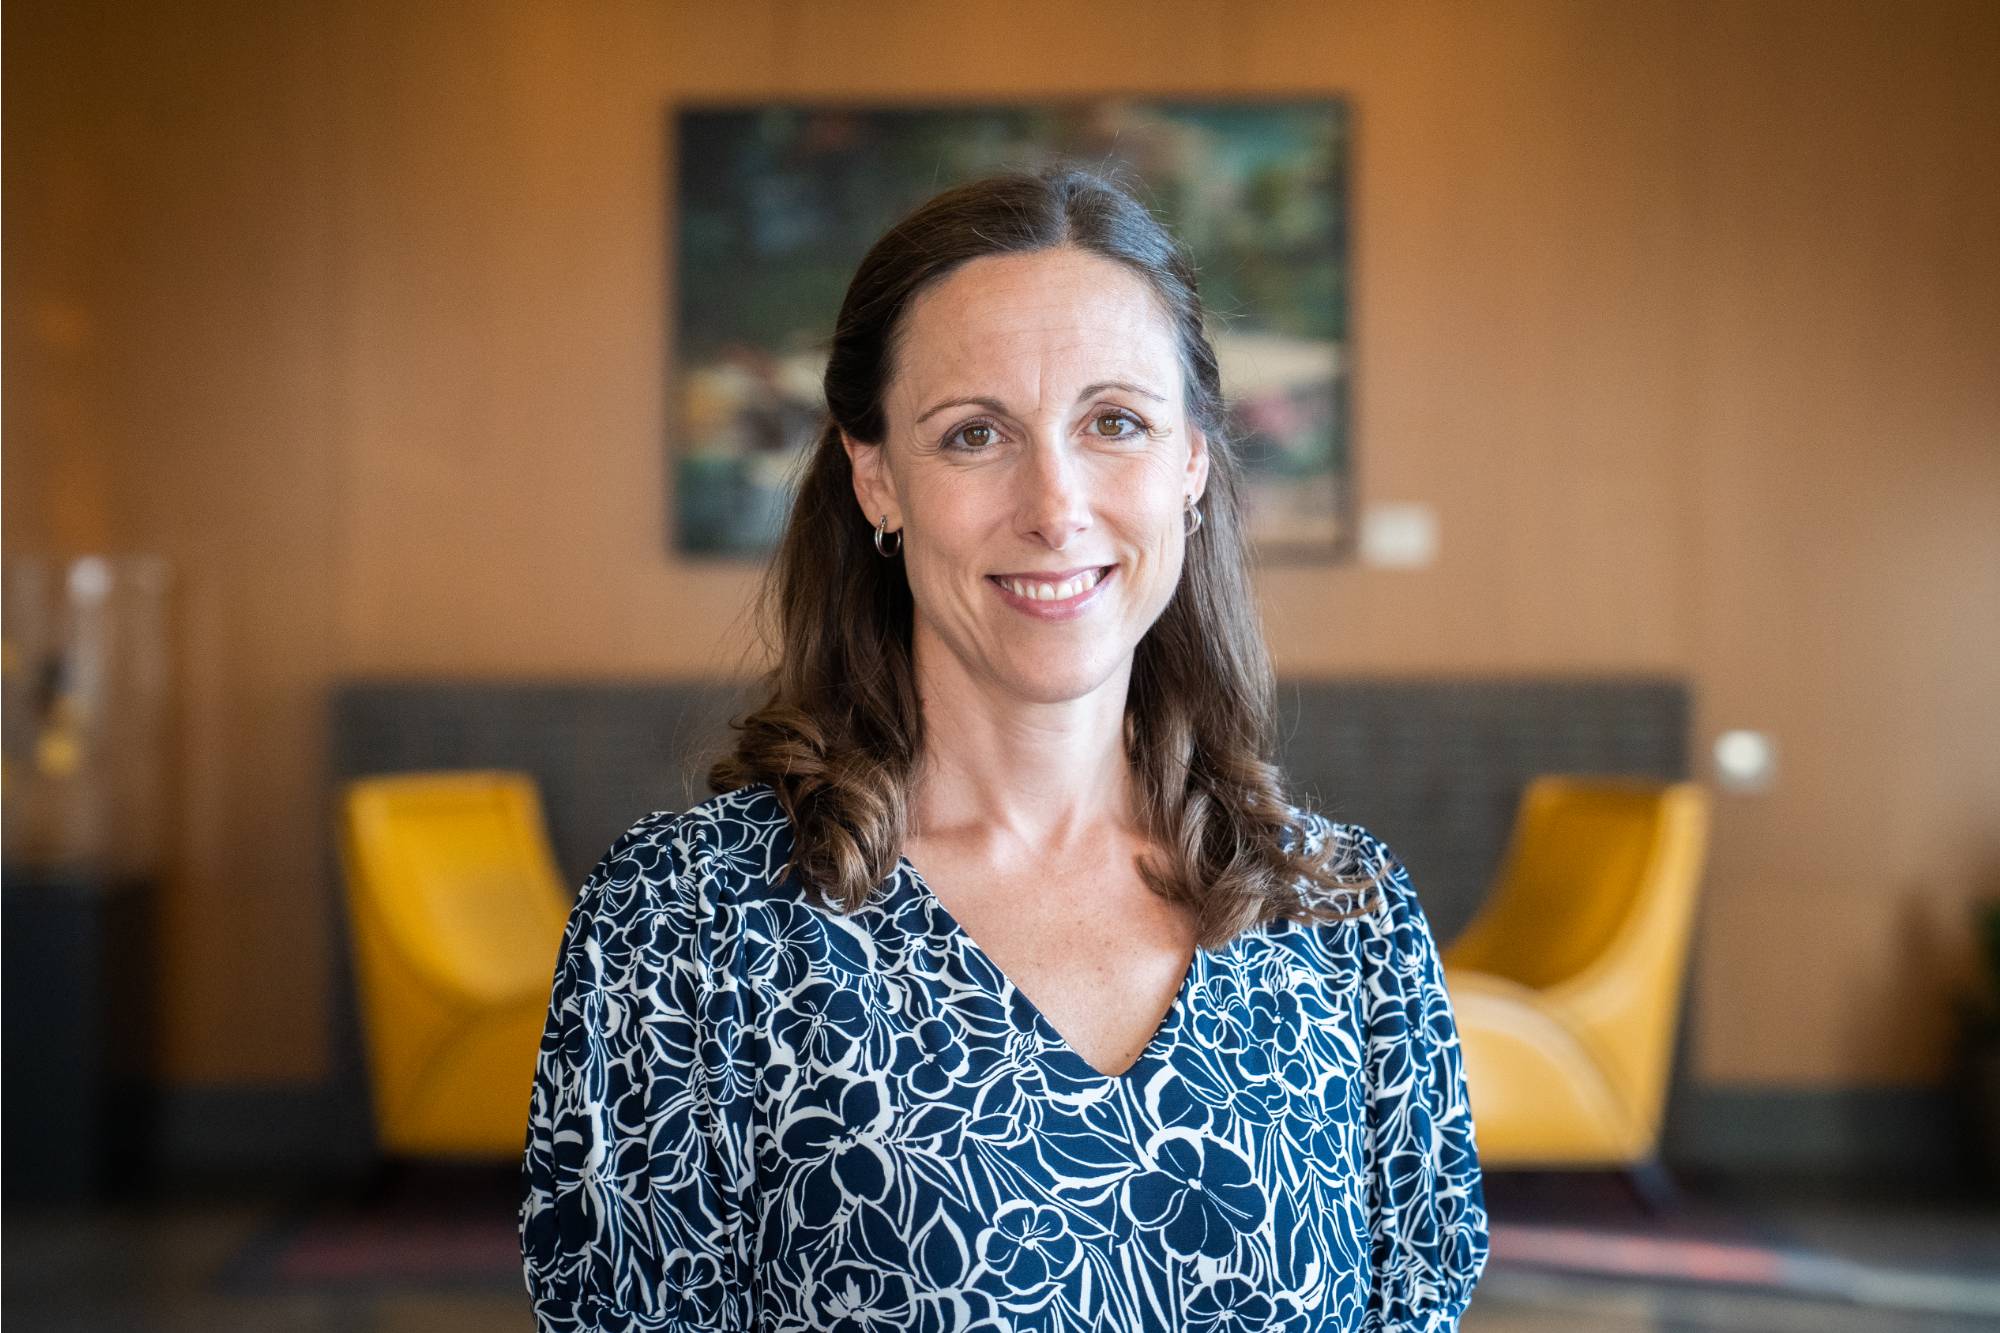 Kathryn Ohle, Associate Professor of Teaching and Learning